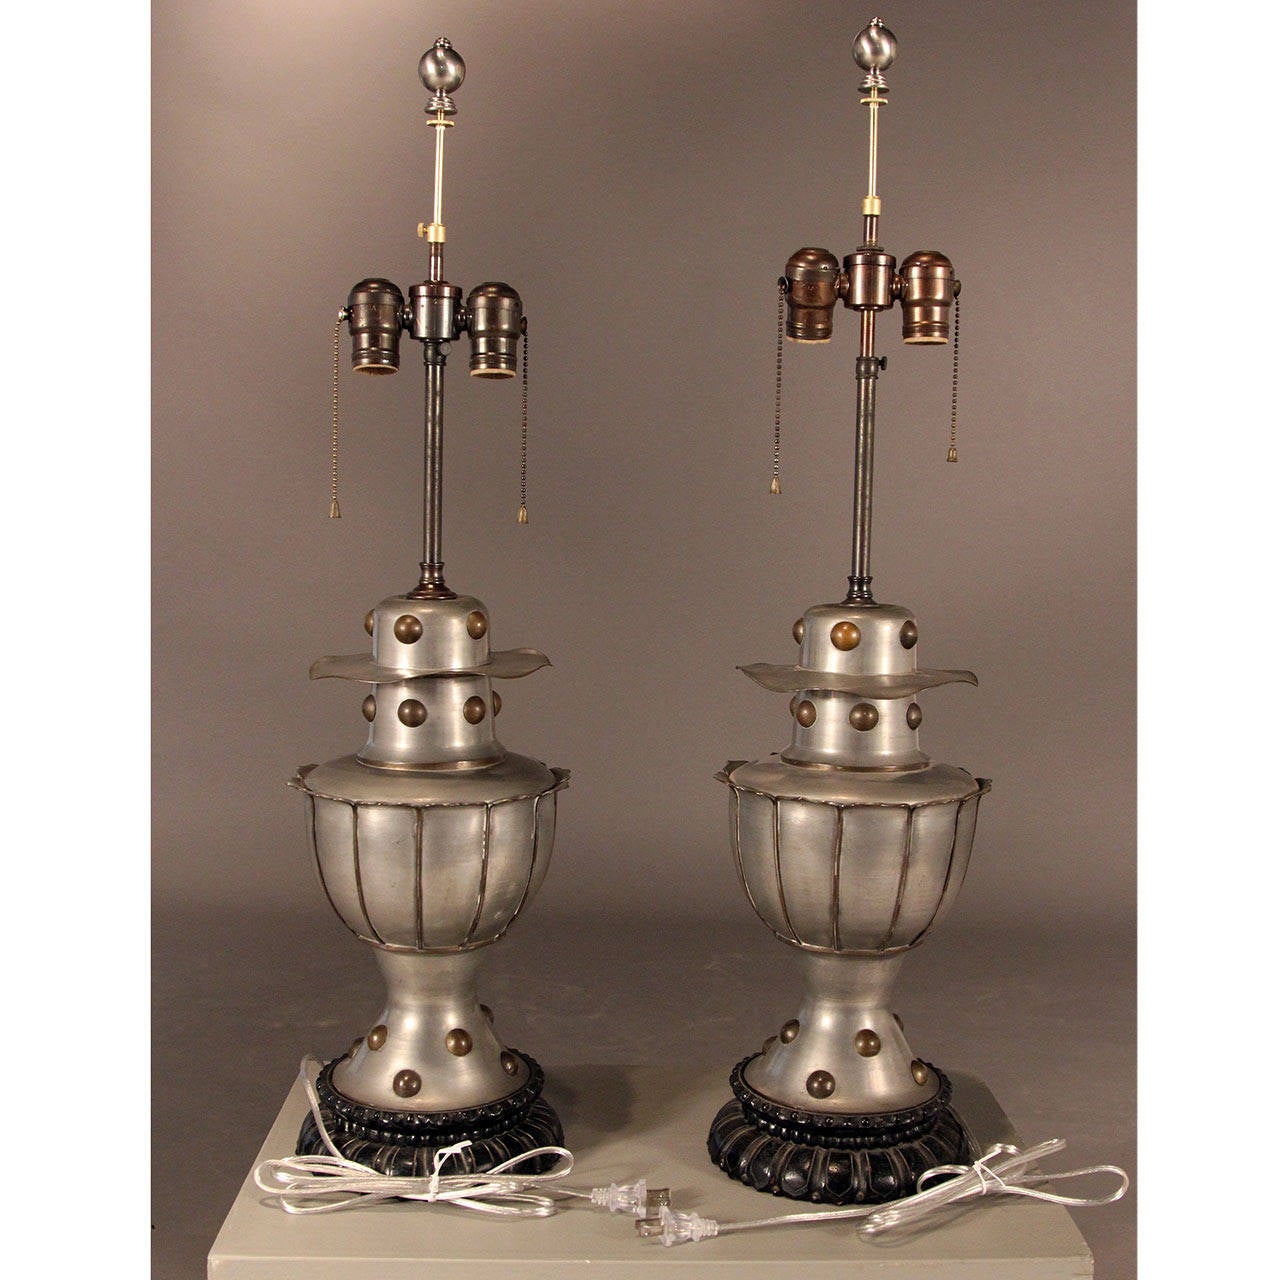 Exquisitely crafted pewter lamps with brass accents and carved wood bases in overall fabulous condition. Impressive size and distinctive armorial design make an elegant and dramatic statement.